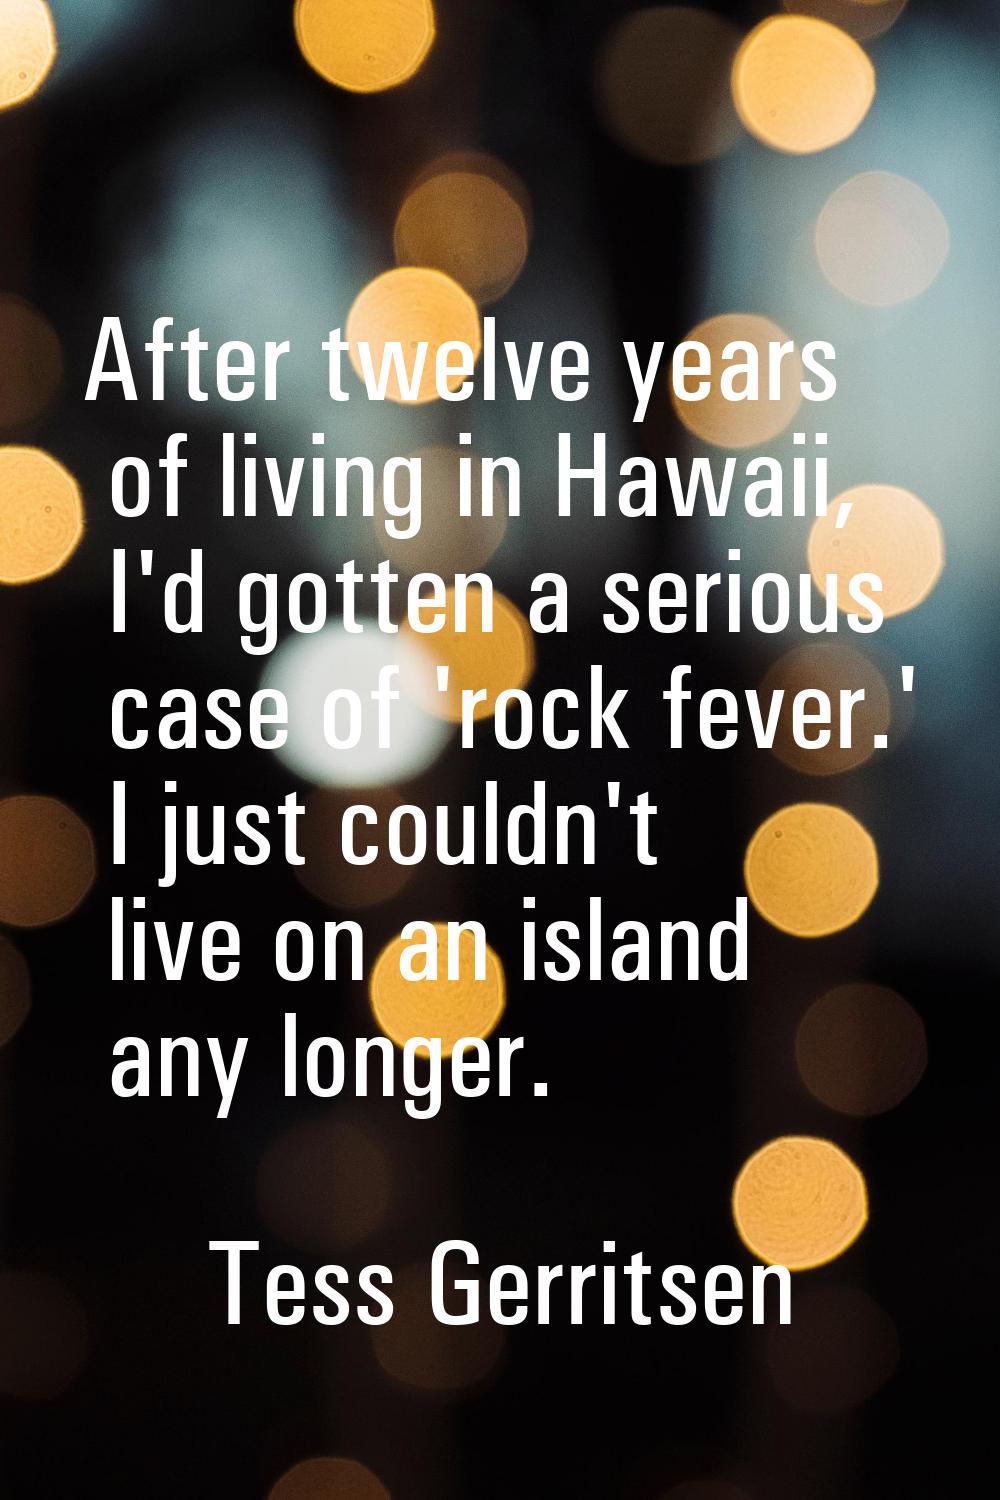 After twelve years of living in Hawaii, I'd gotten a serious case of 'rock fever.' I just couldn't 